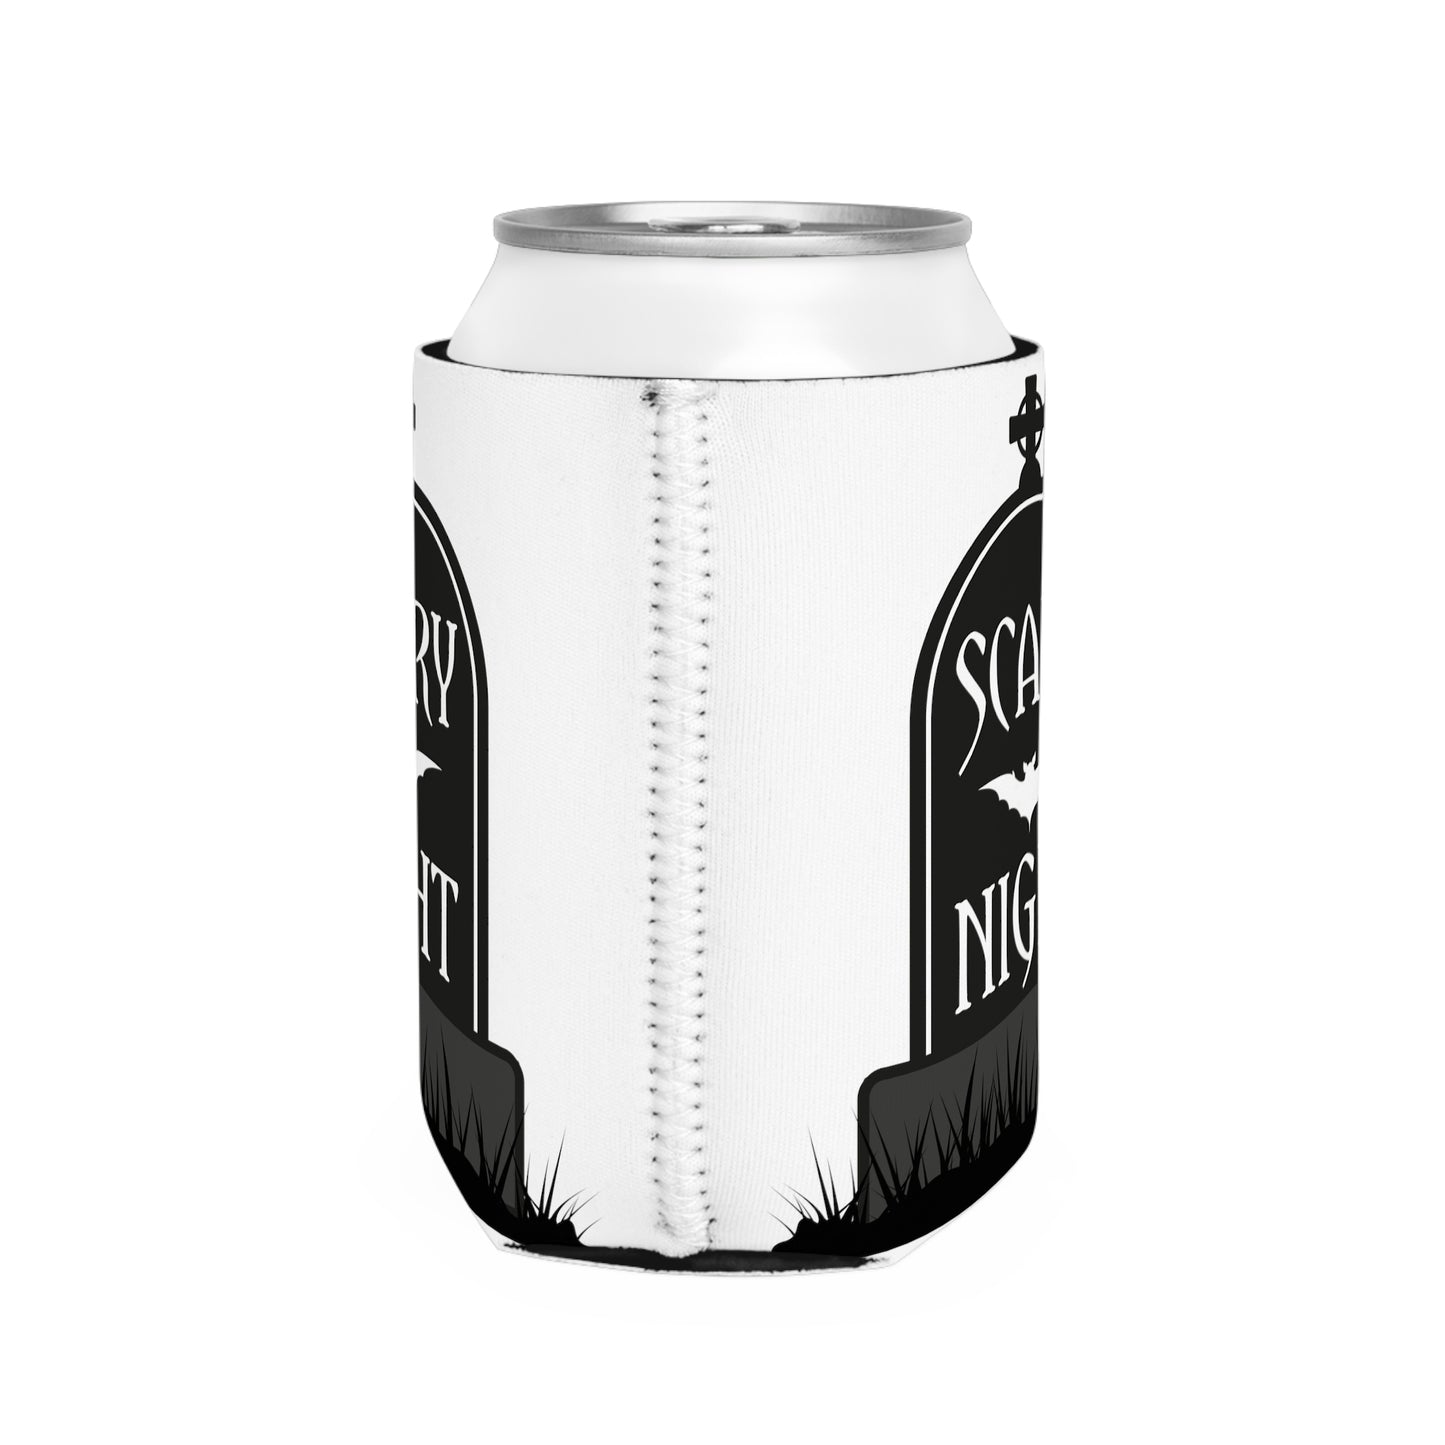 Halloween Scary Night Can Cooler Sleeve